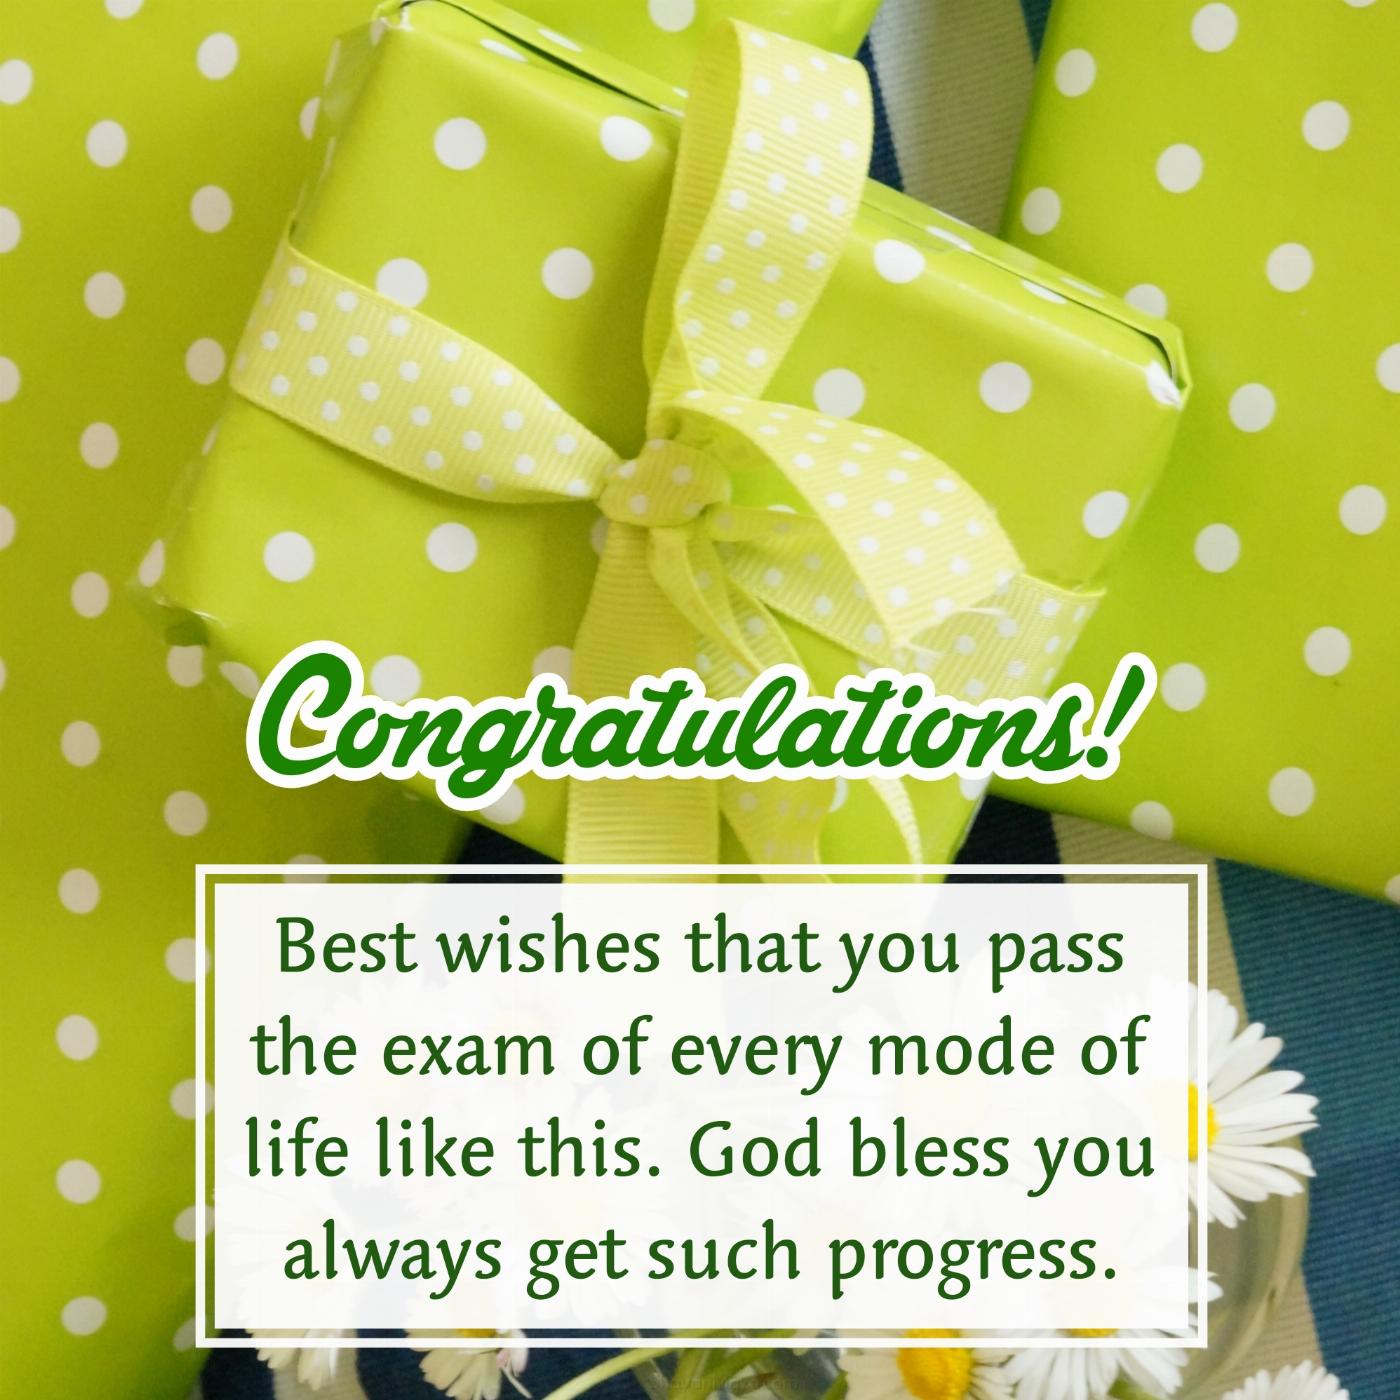 Best wishes that you pass the exam of every mode of life